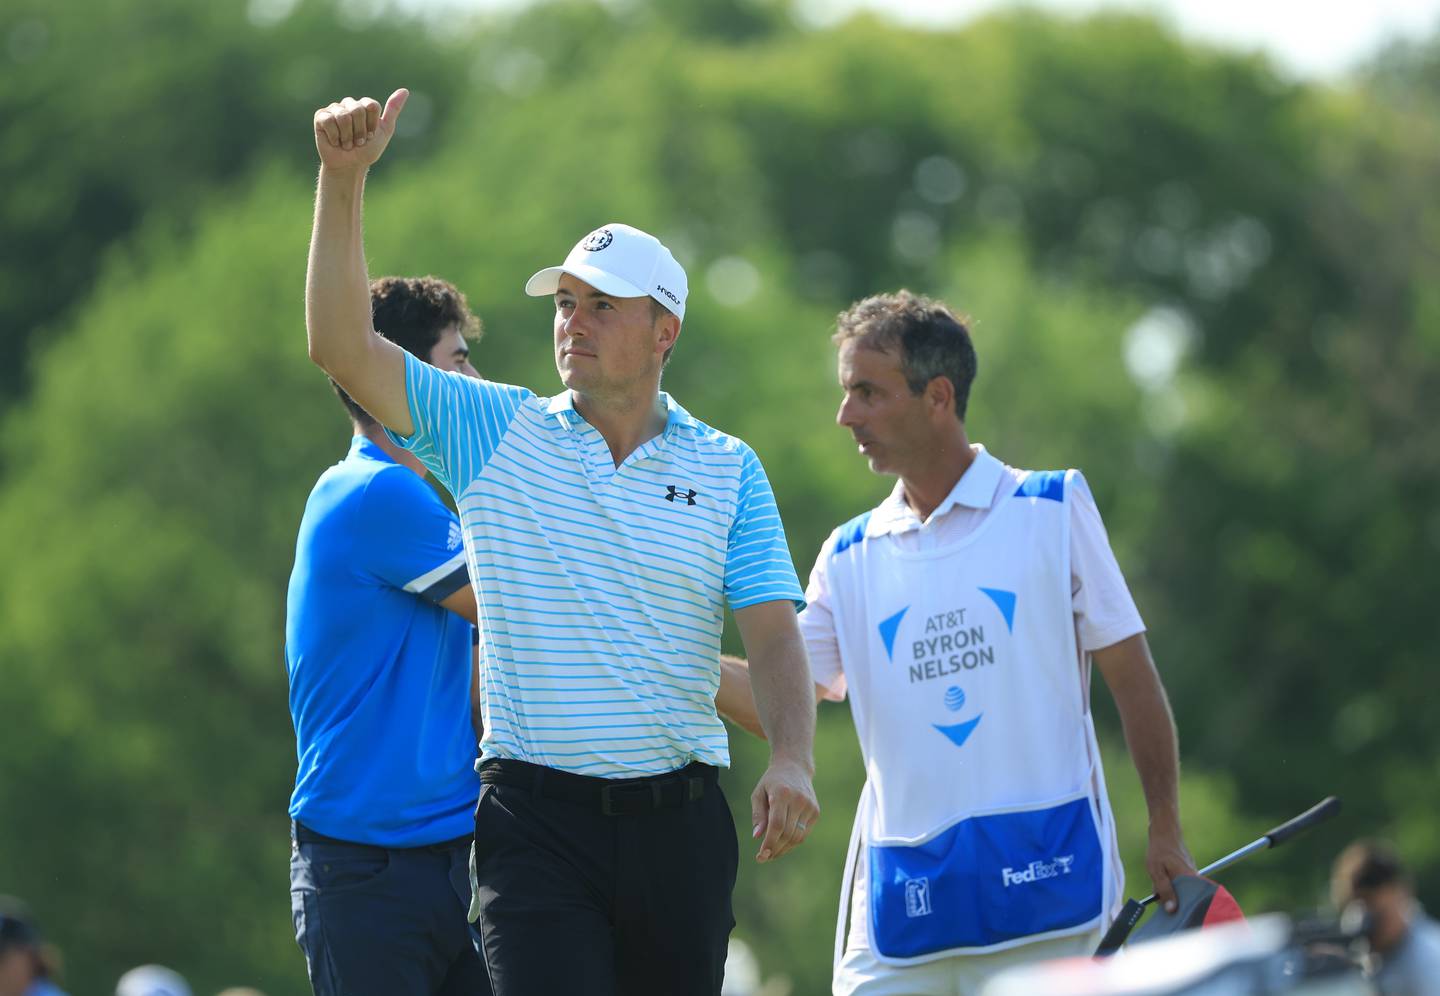 Jordan Spieth after the final round of the AT&T Byron Nelson in Texas. AFP